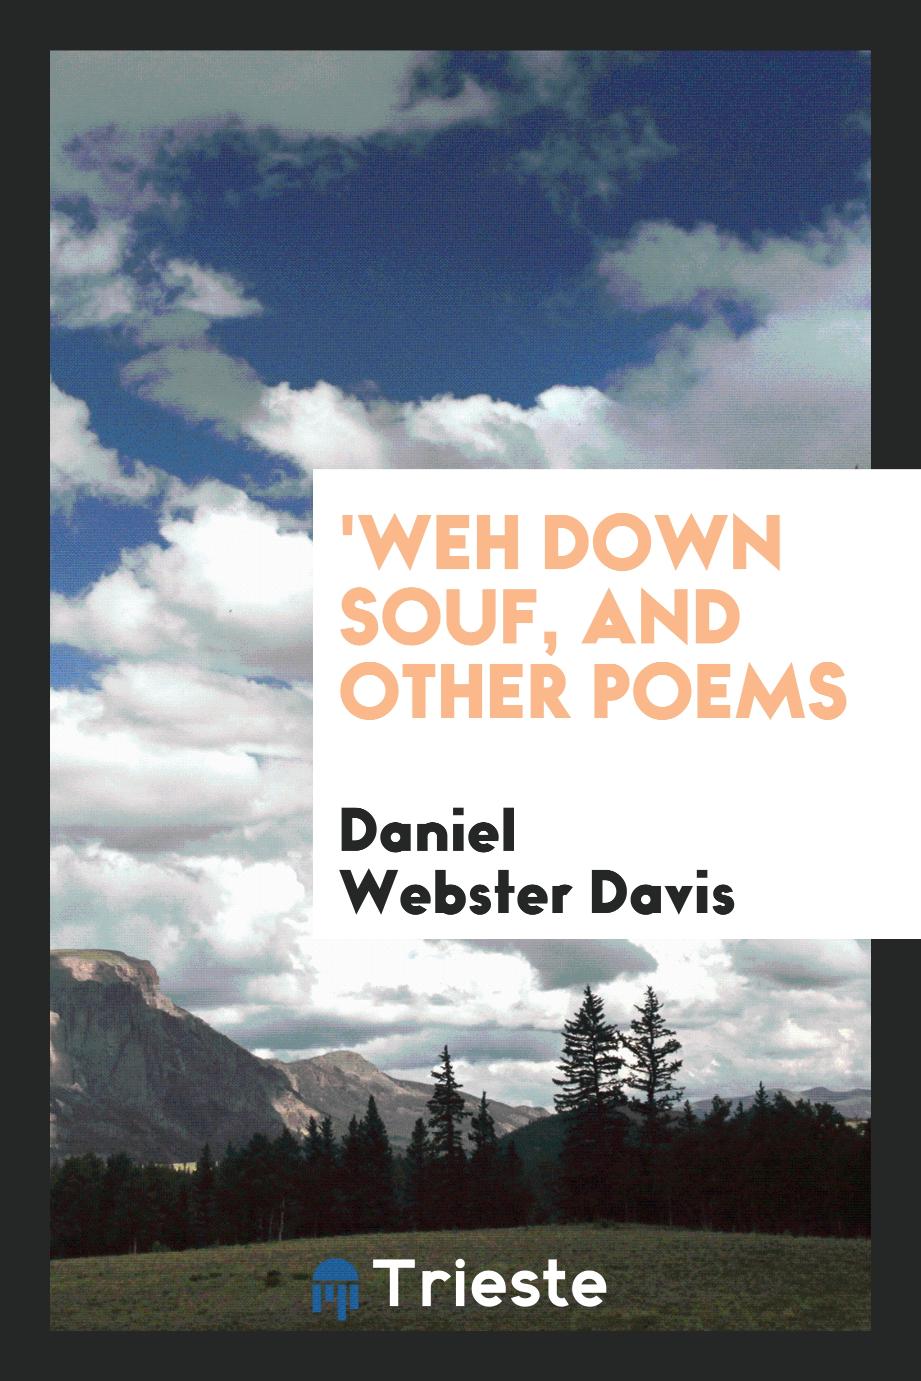 'Weh down souf, and other poems